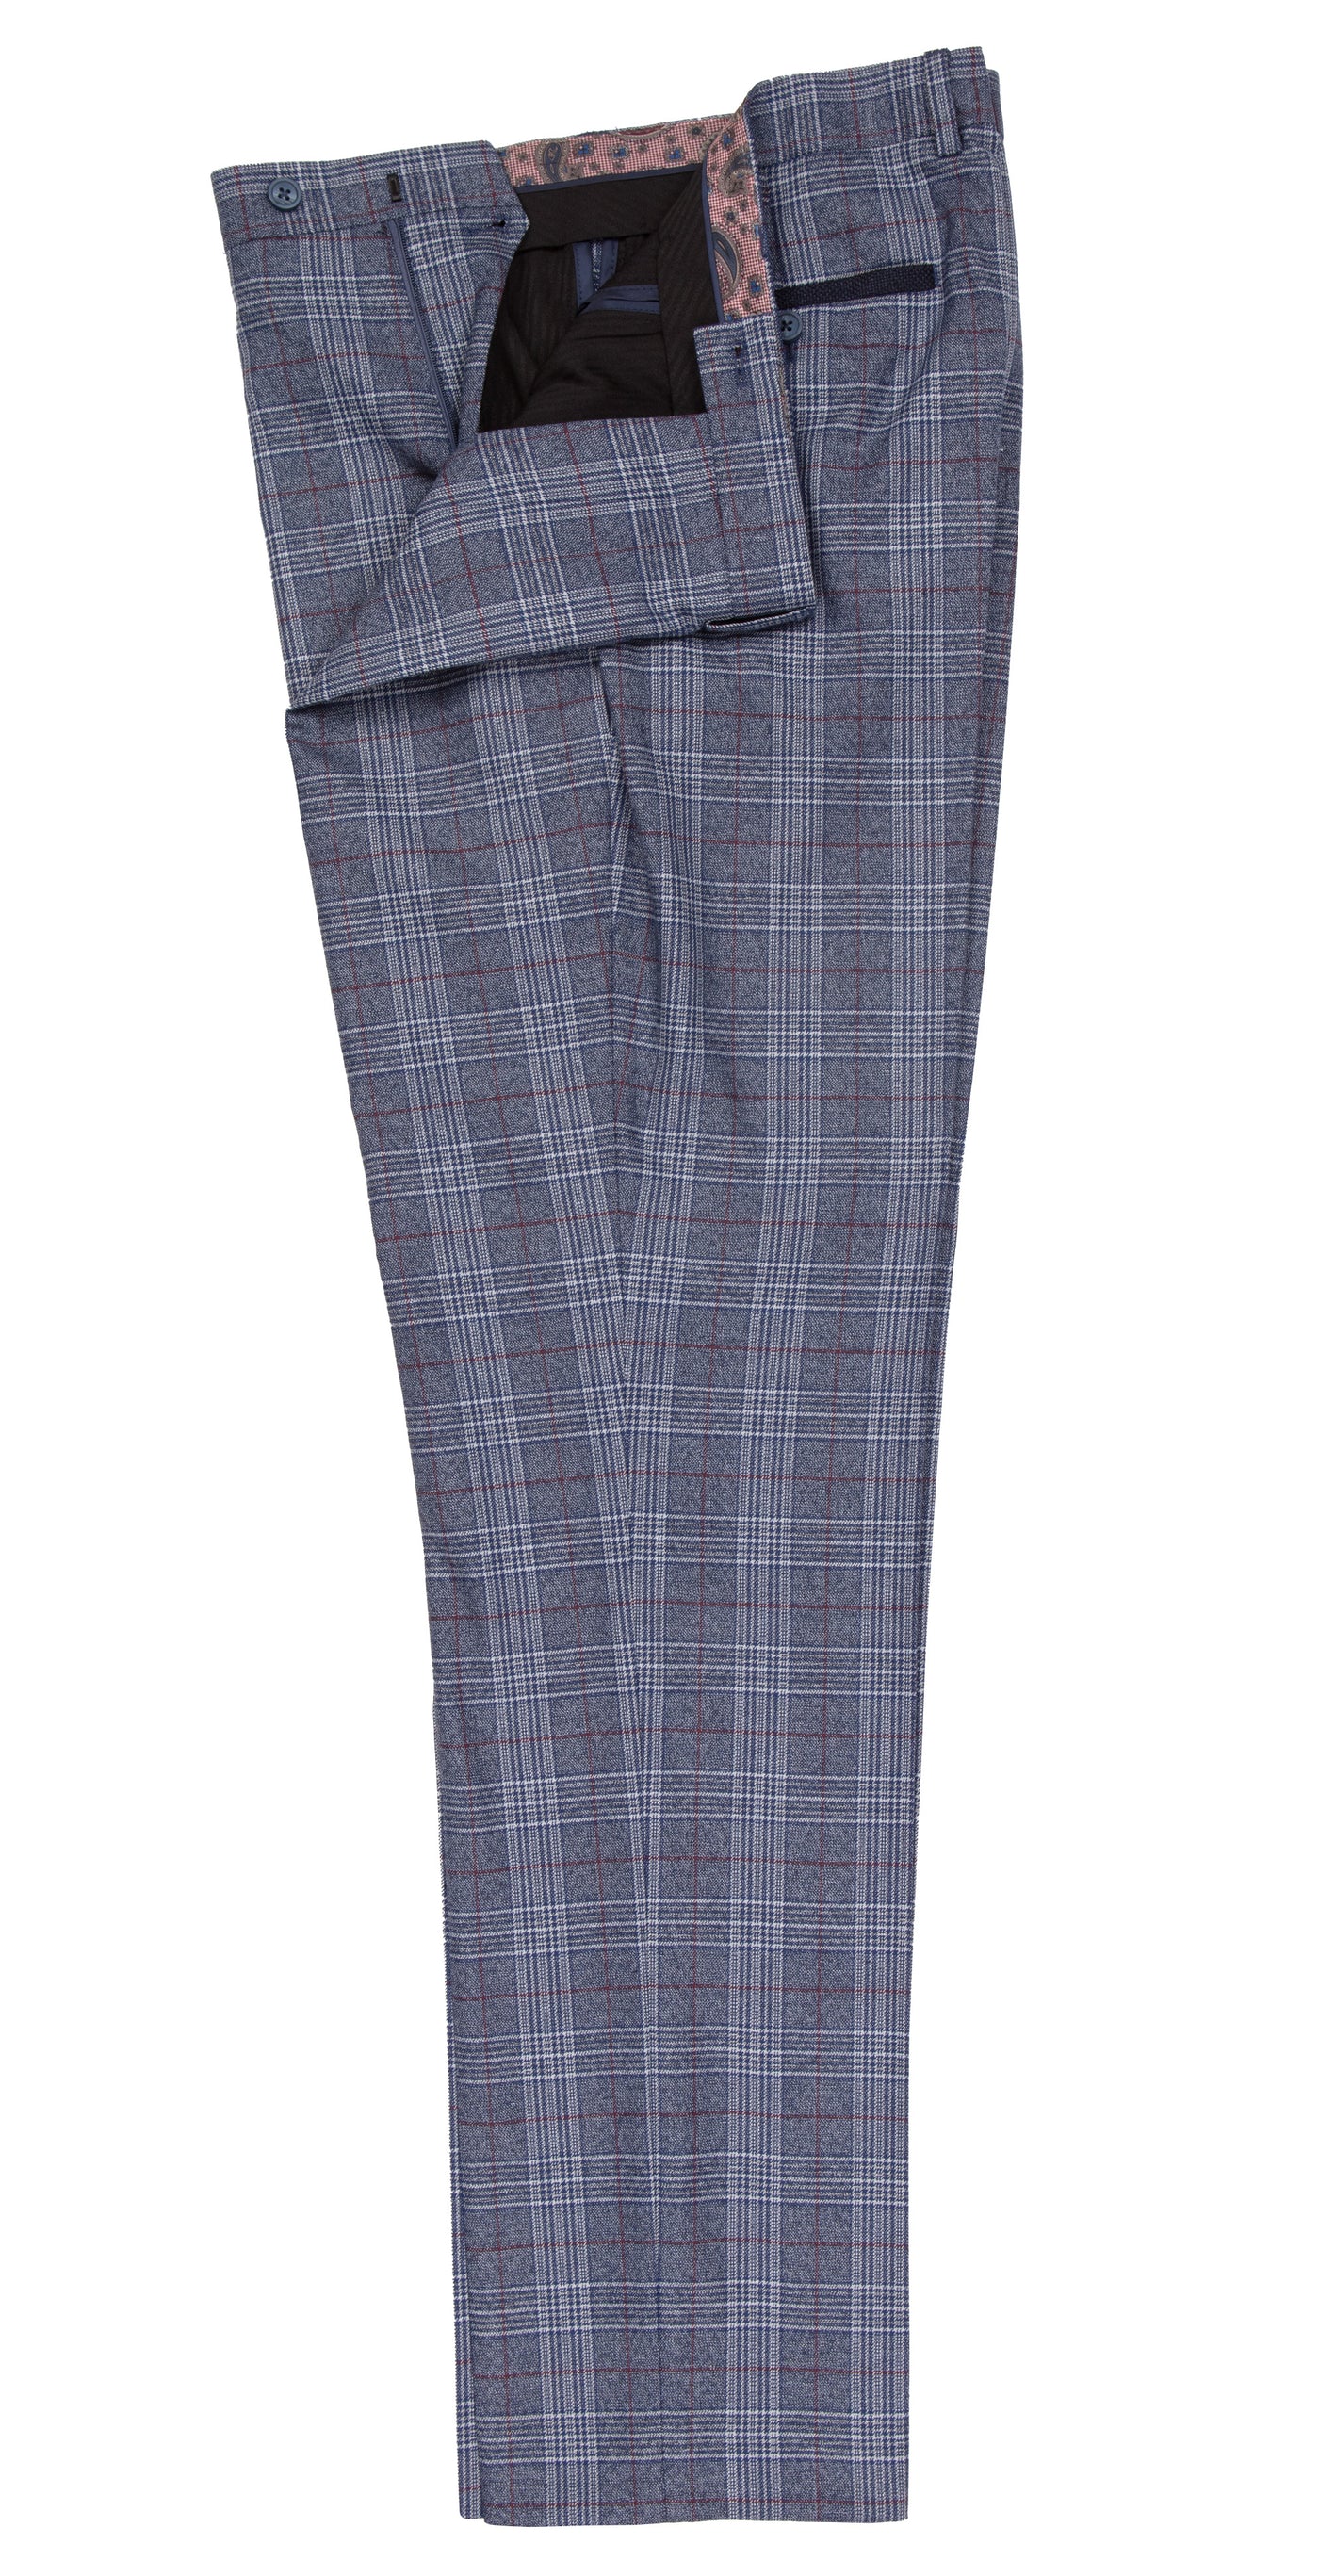 Men's Multi-Checked Trousers